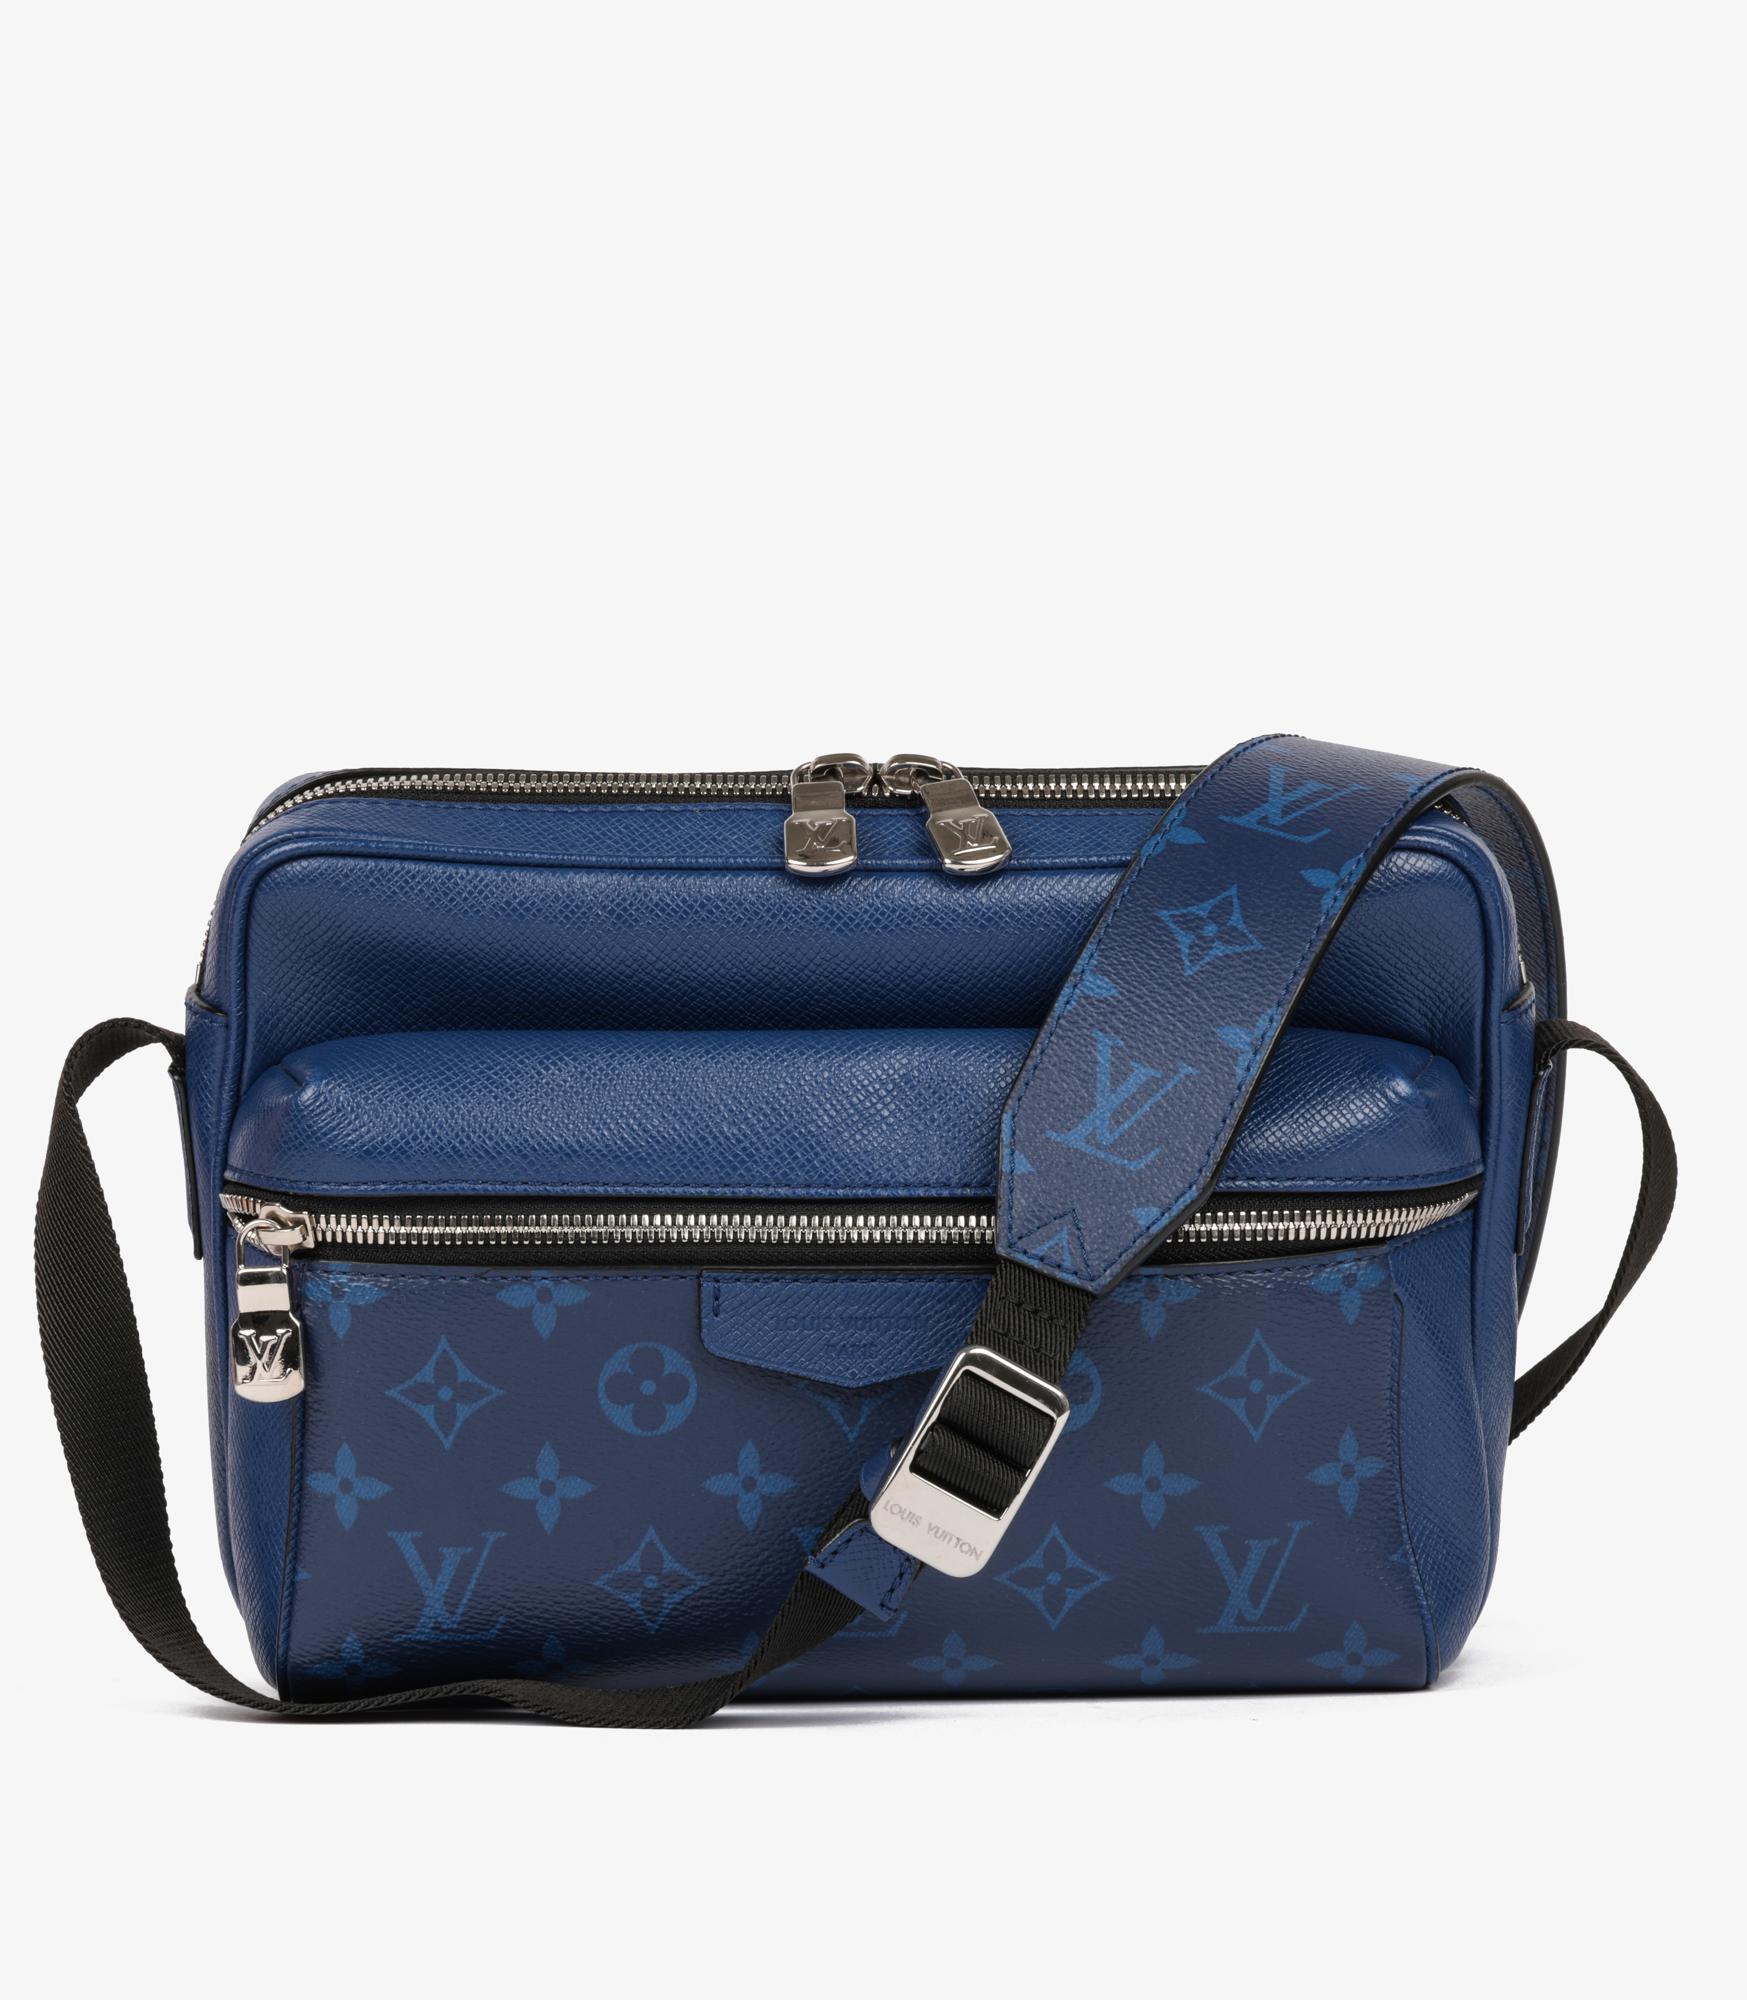 Louis Vuitton Cobalt Monogram Coated Canvas & Cobalt Taiga Leather Outdoor Messenger Bag

Brand- Louis Vuitton
Model- Outdoor Messenger Bag
Product Type- Crossbody, Shoulder
Serial Number- FO 021
Age- Circa 2021
Accompanied By- Louis Vuitton Dust